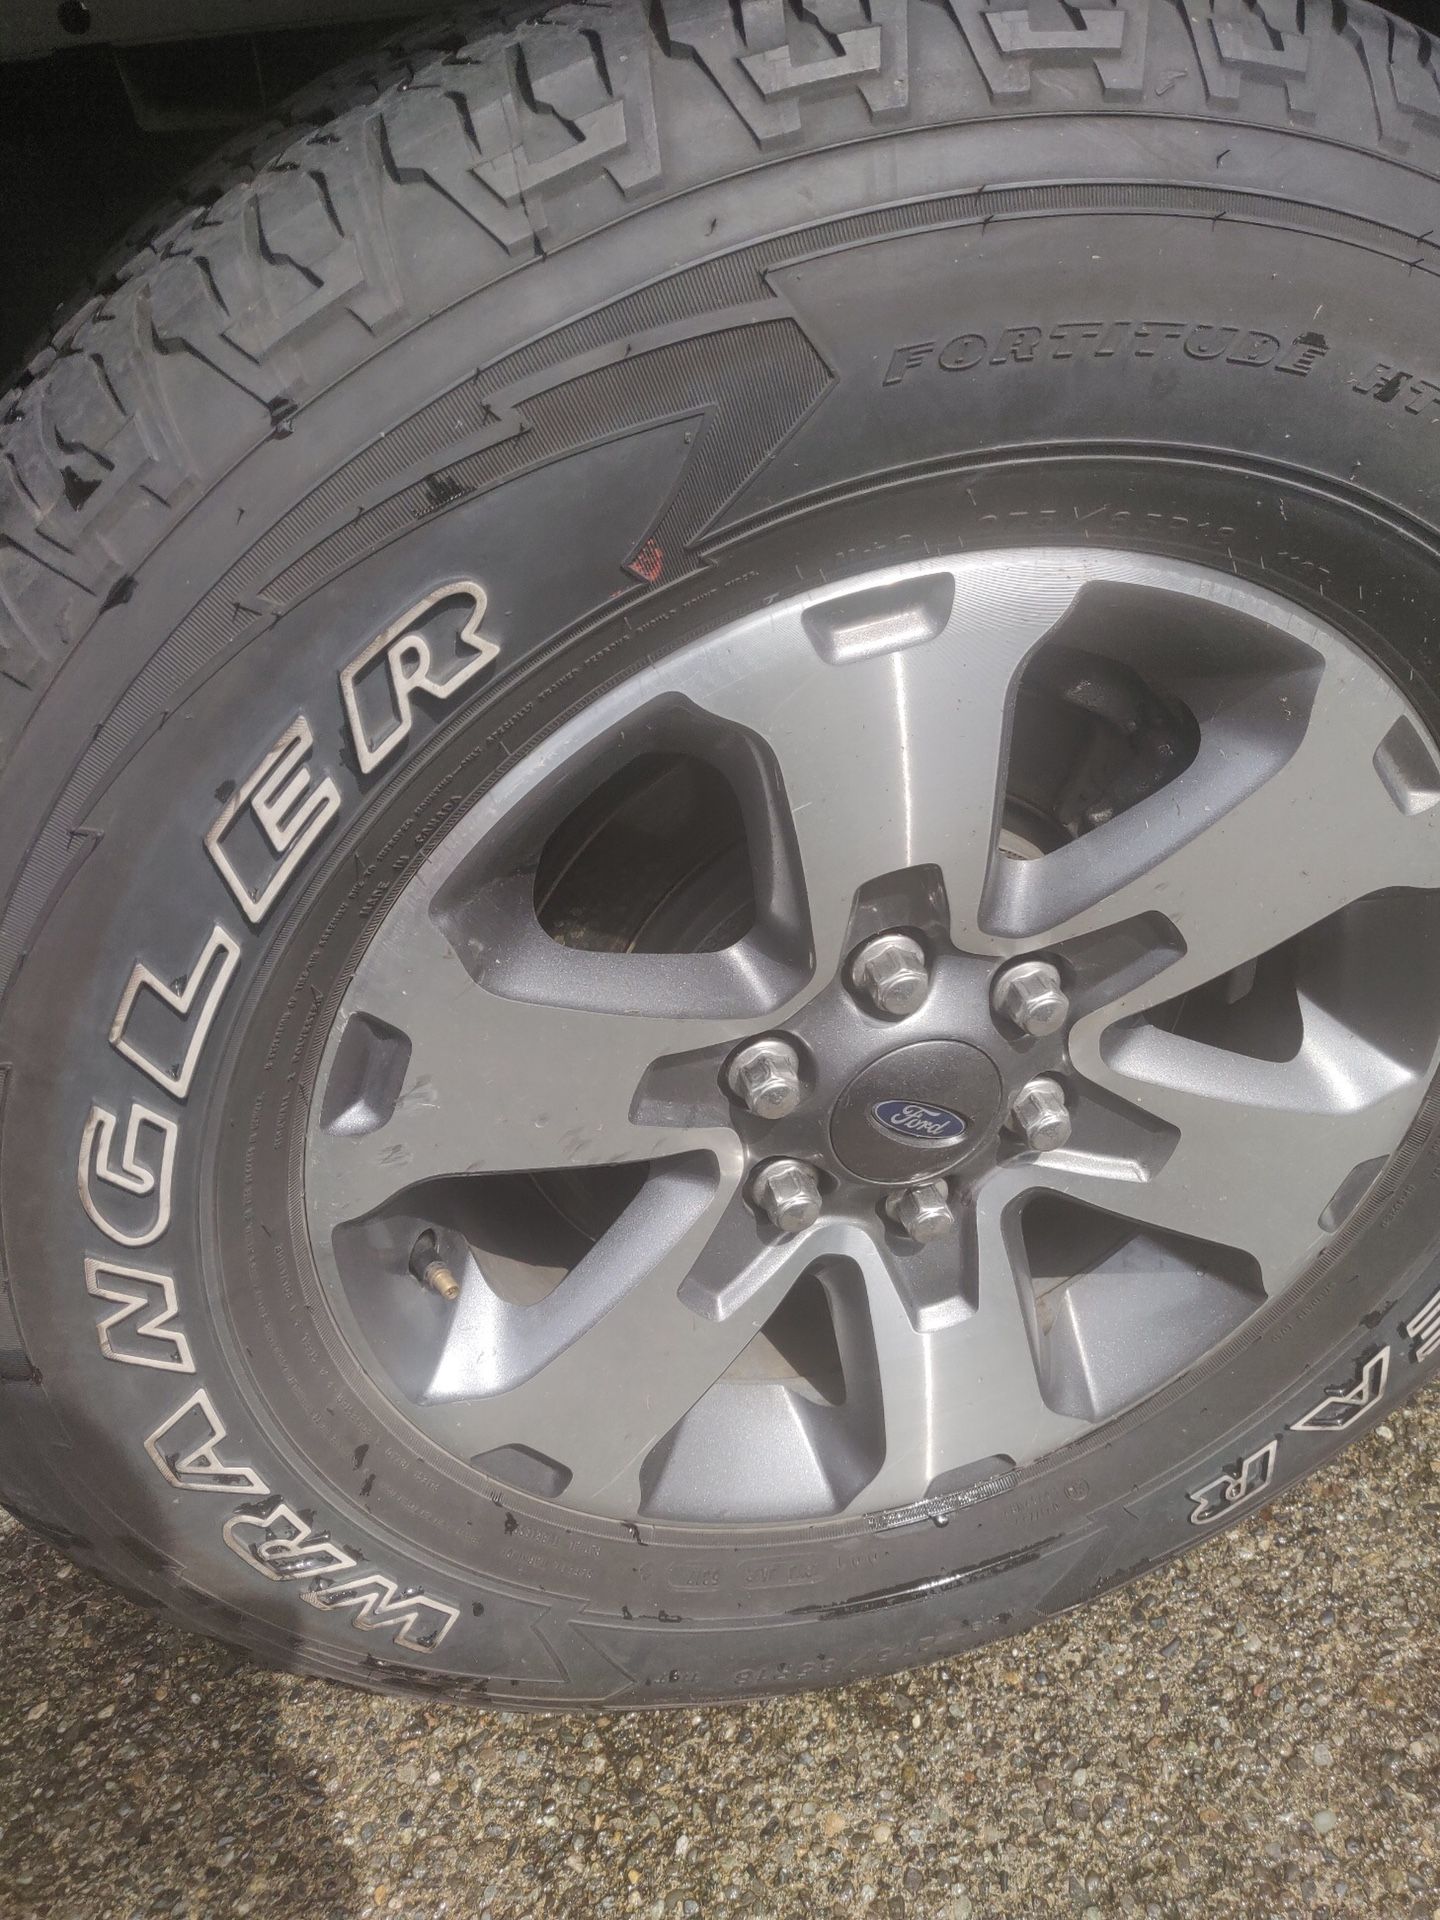 F150 wheels and tires 265/75/R18 Goodyear Wrangler for Sale in Buckley, WA  - OfferUp